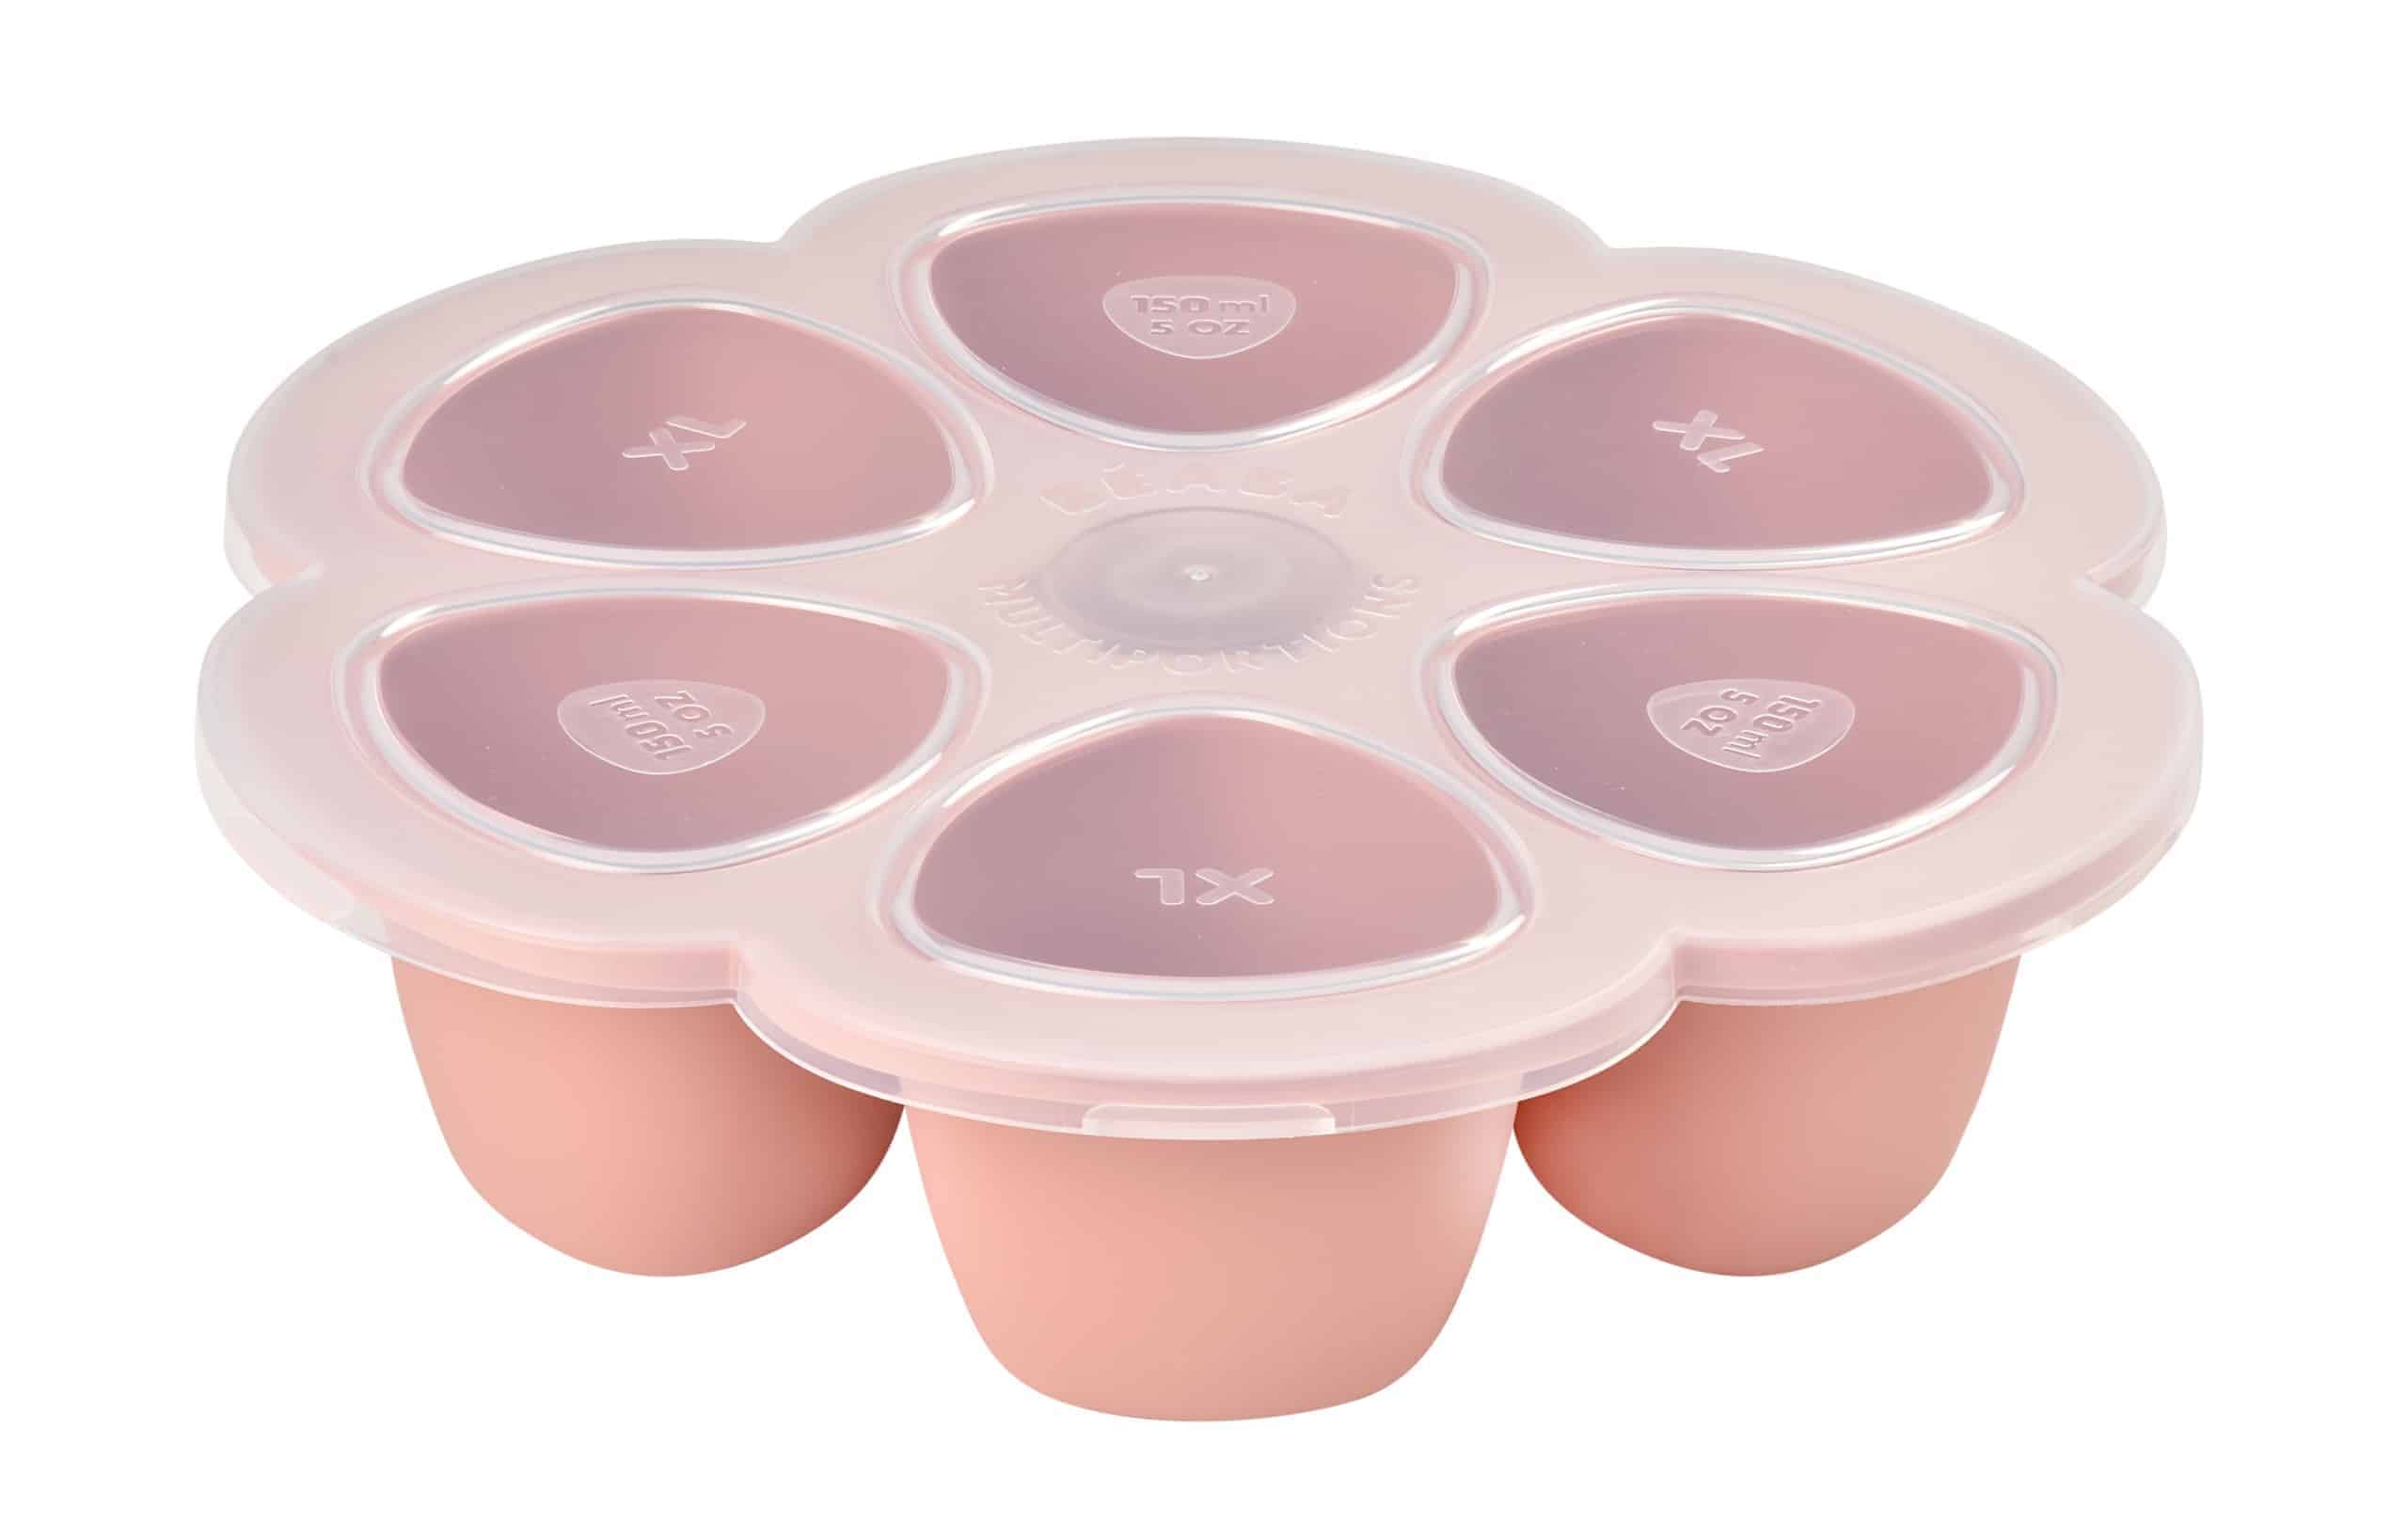 BEABA Multiportions 3oz PINK